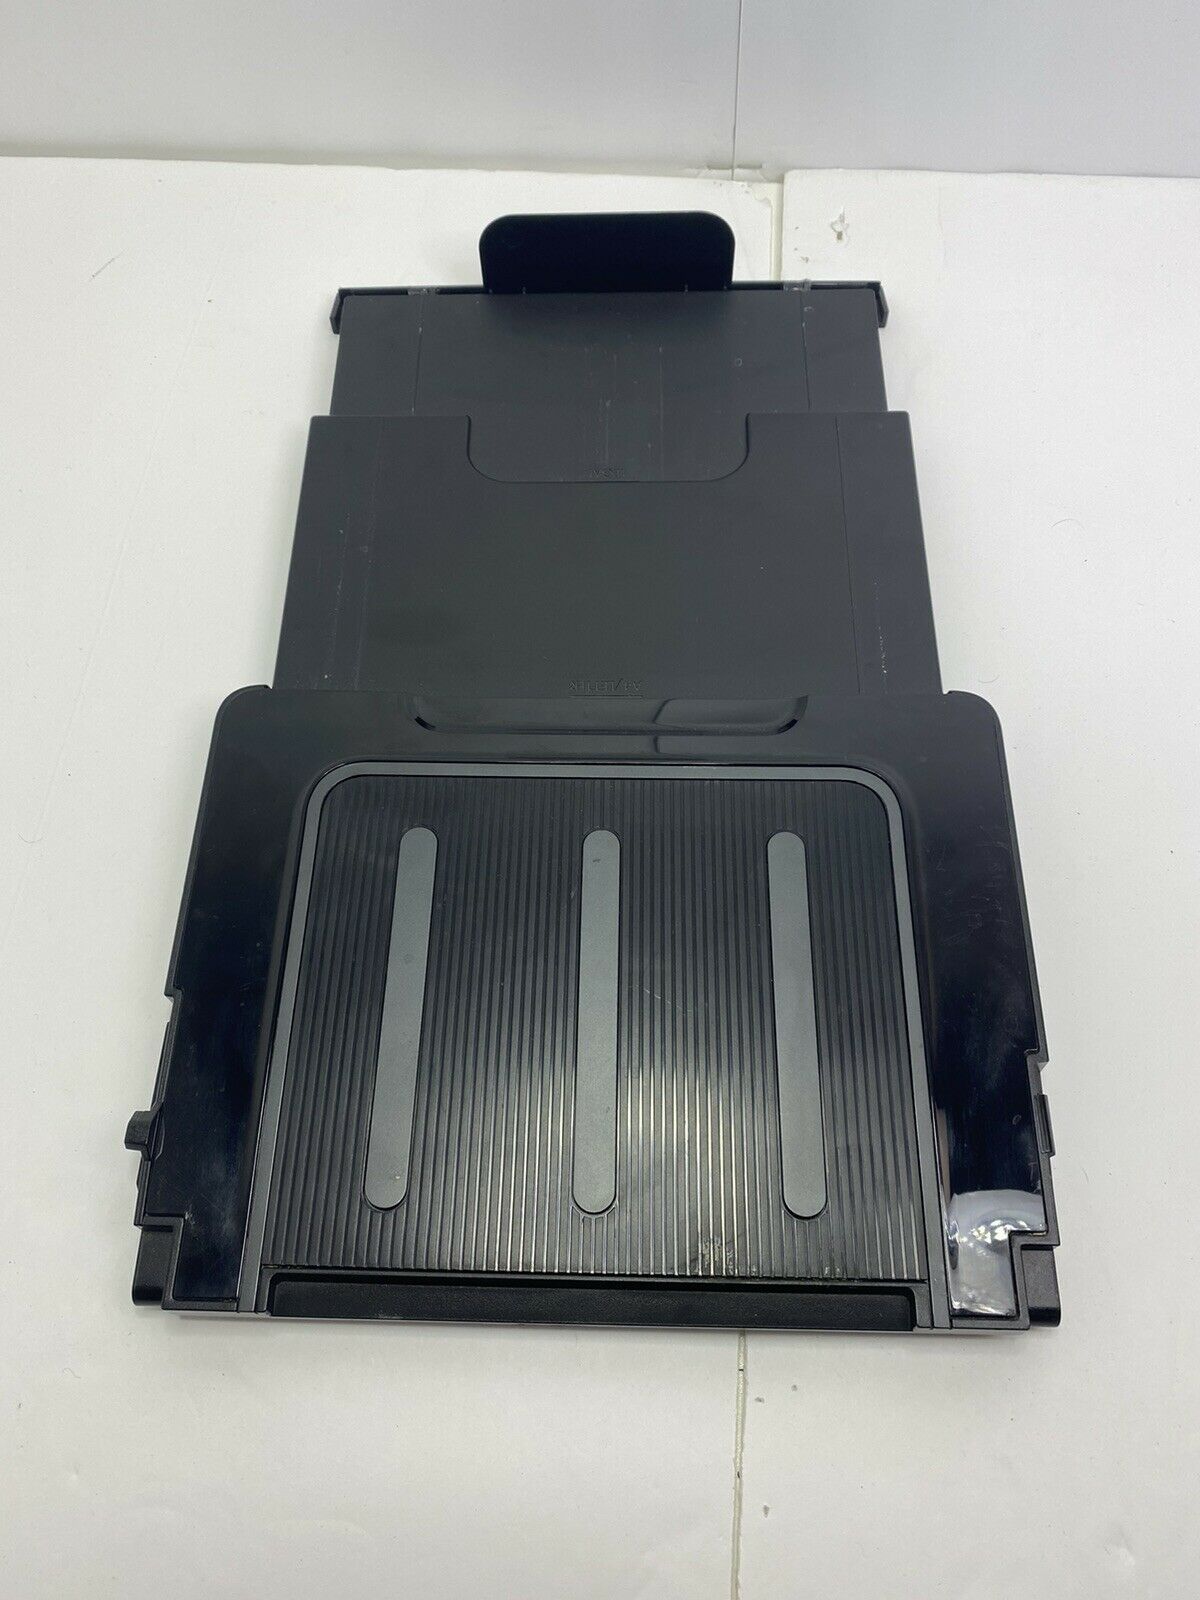 Replacement HP Officejet Pro 8500A Printer Paper Output Tray Model